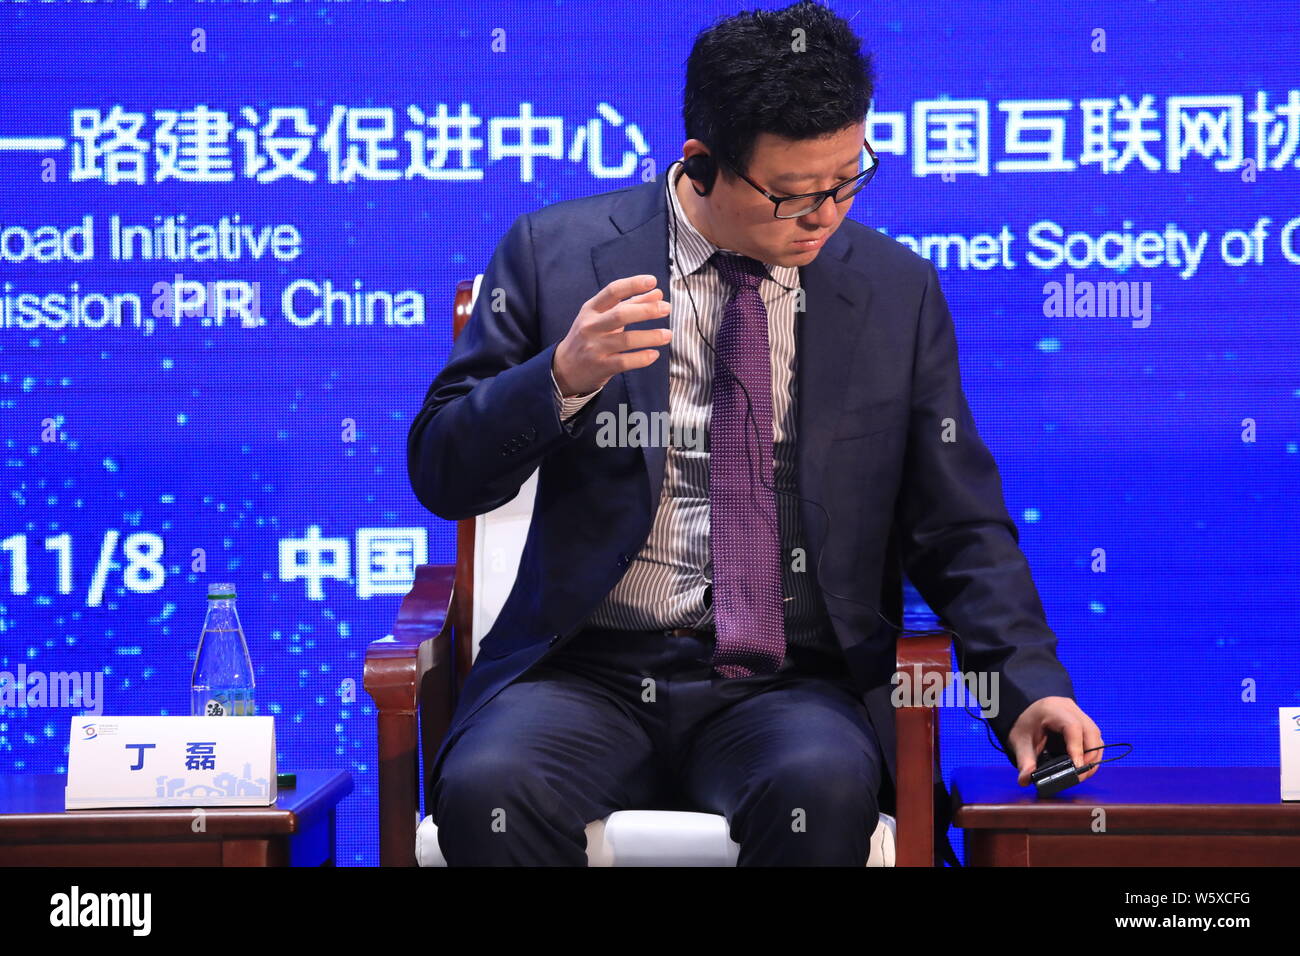 William Ding or Ding Lei, CEO of Netease (163.com), attends the sub-forum of 'International Cooperation along the Digital Silk Road' during the 5th Wo Stock Photo